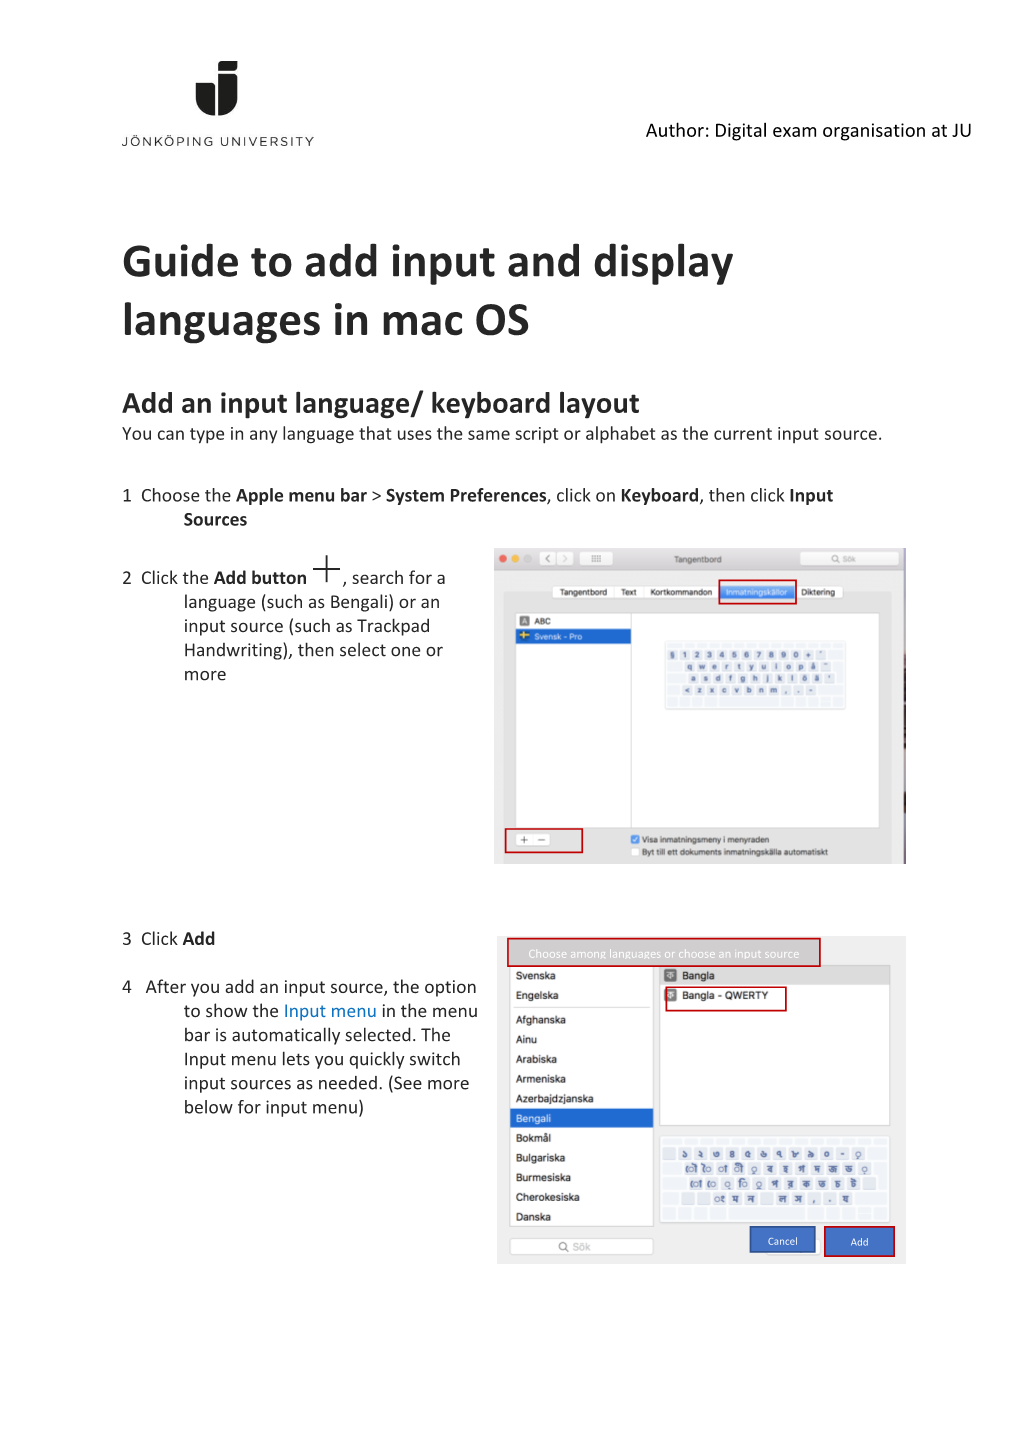 Guide to Add Input and Display Languages in Mac OS